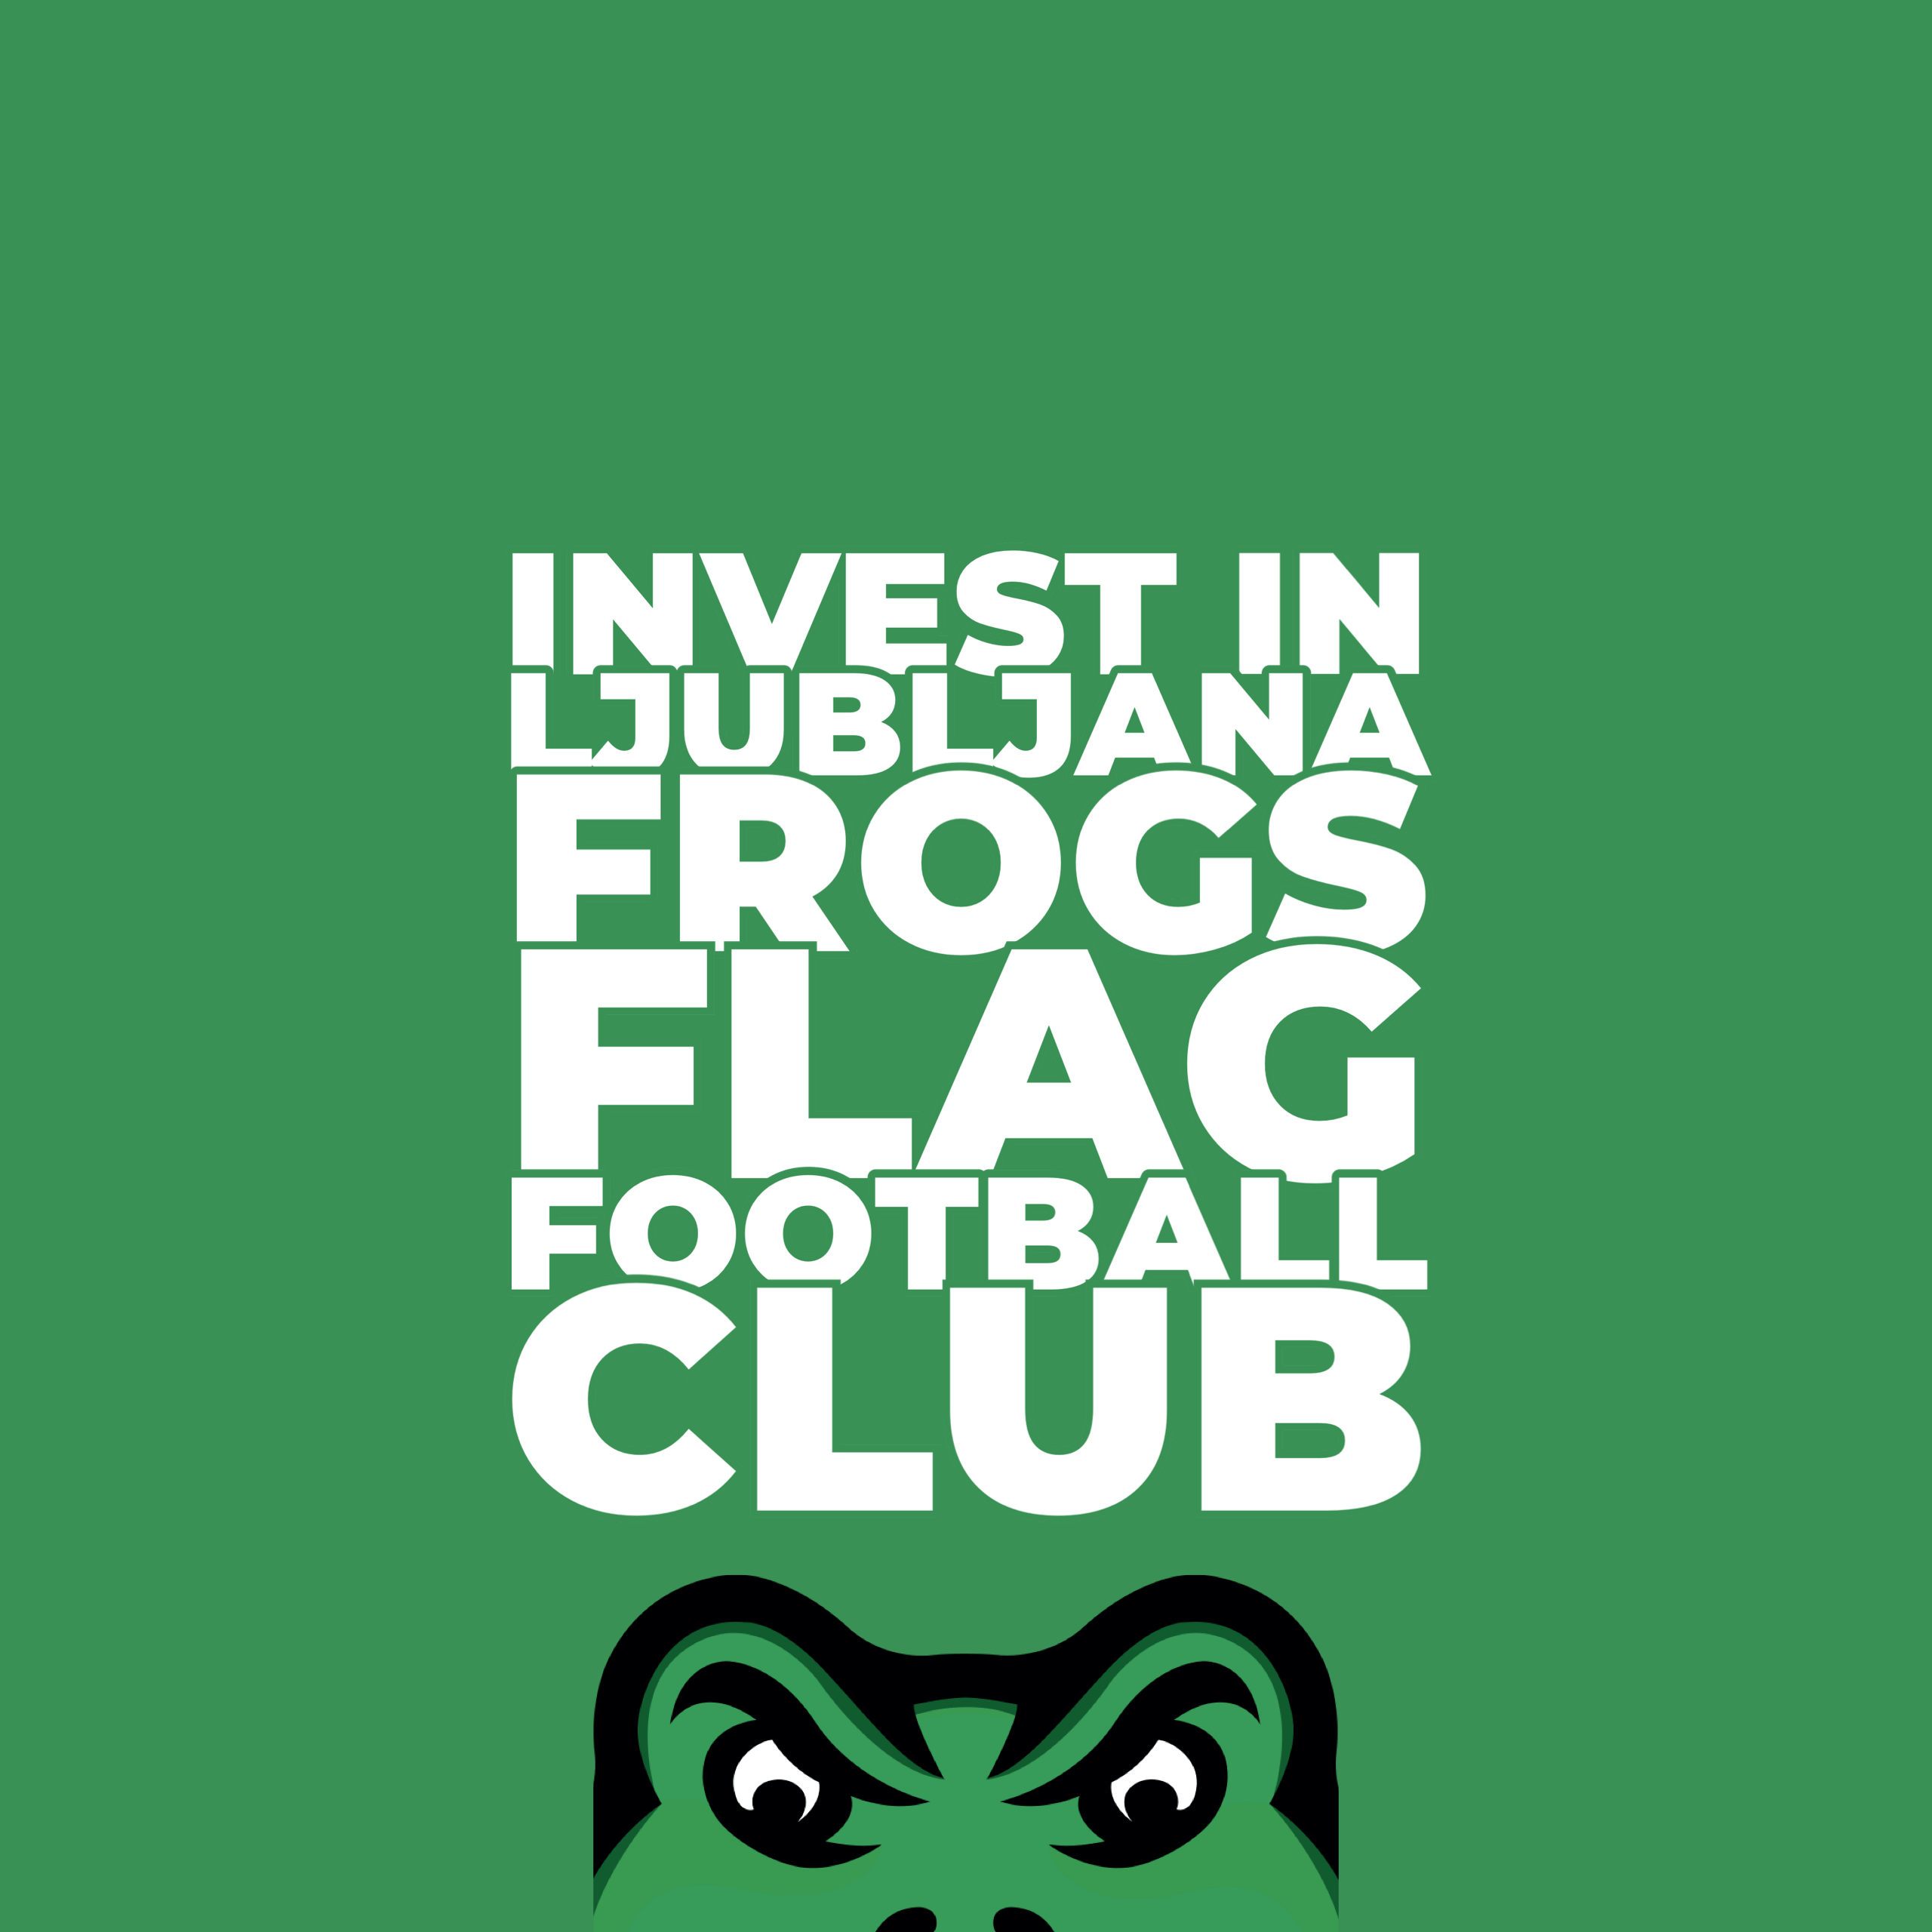 The Benefits of Donating and Sponsoring Local Sports Teams: A Look at the Ljubljana Frogs Flag Football Club